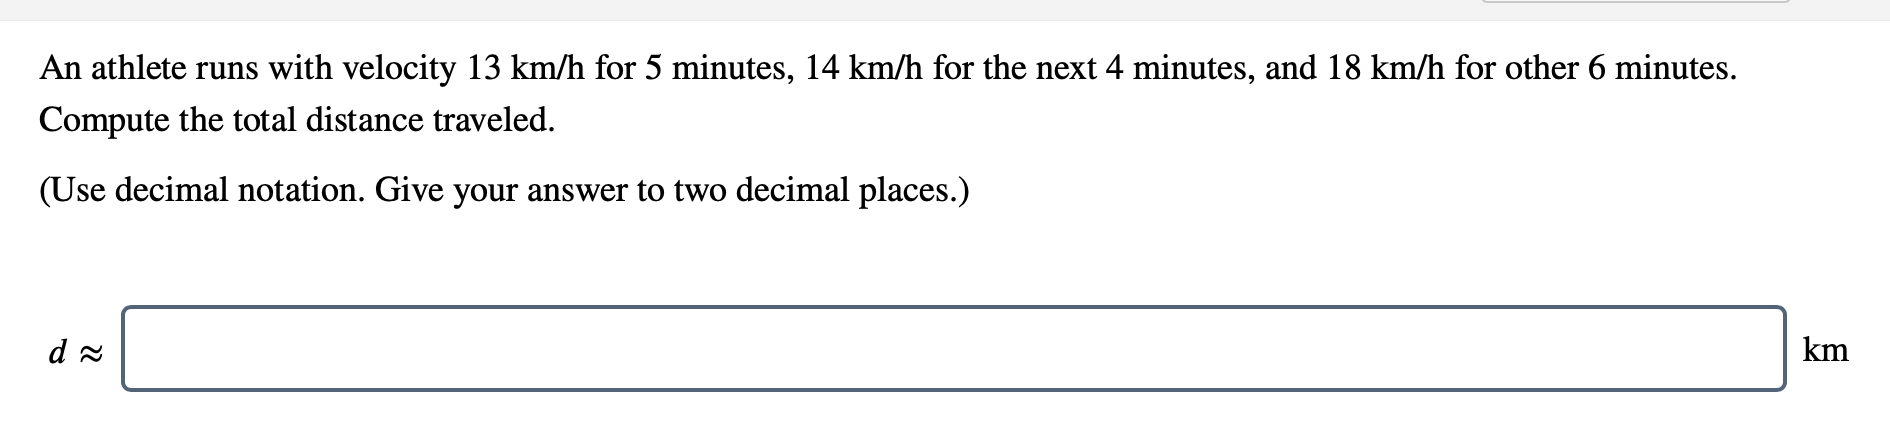 ### Problem Statement:
An athlete runs with a velocity of 13 km/h for 5 minutes, 14 km/h for the next 4 minutes, and 18 km/h for another 6 minutes. Compute the total distance traveled.

(Use decimal notation. Give your answer to two decimal places.)

#### Calculation Prompt:
\[ d \approx \underline{\hspace{3cm}} \, \text{km} \]